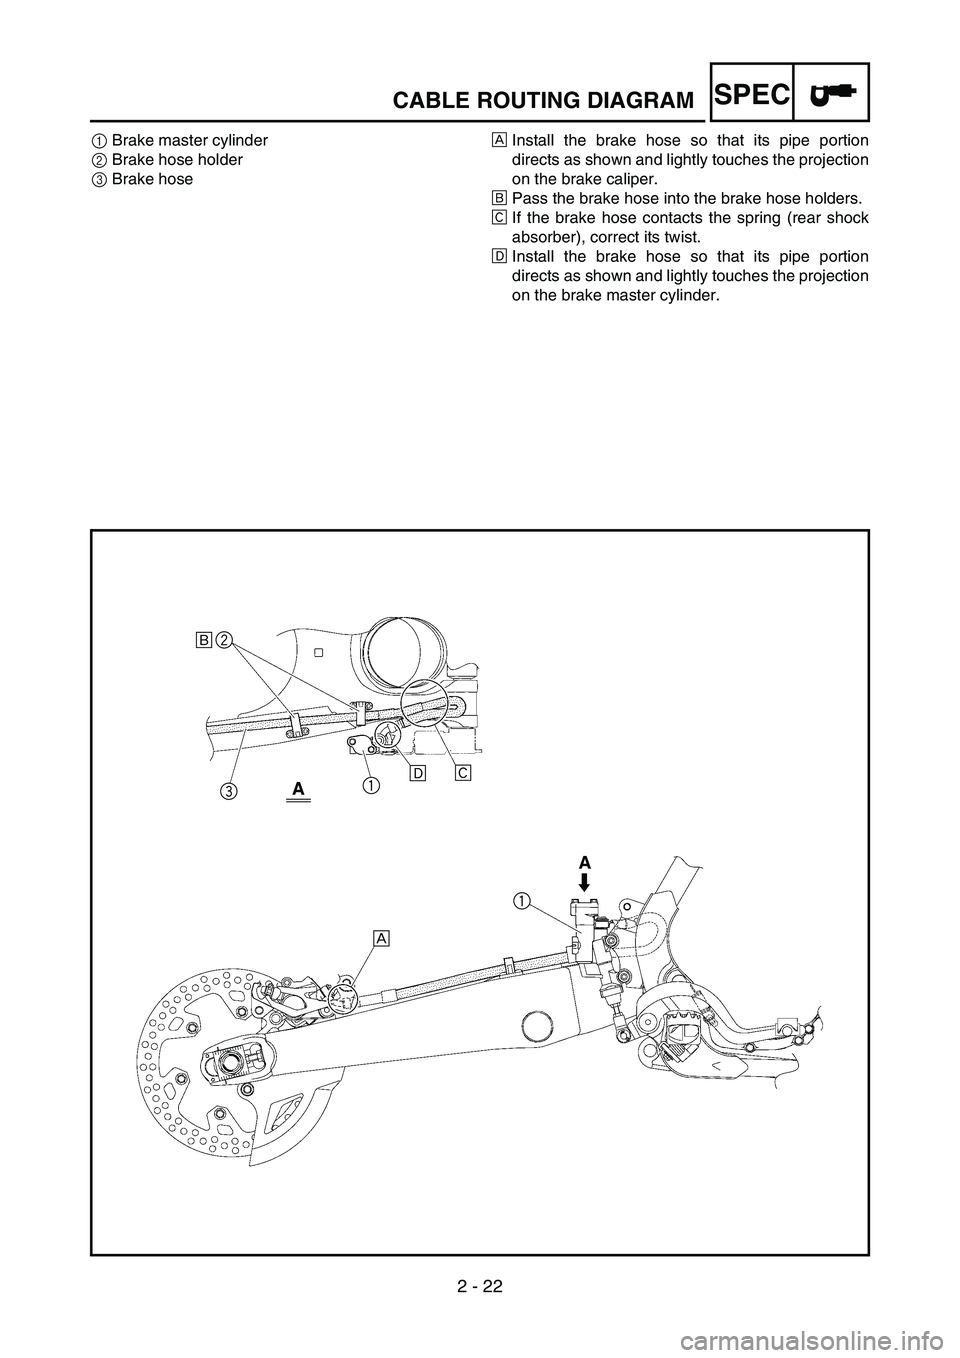 YAMAHA YZ250F 2006  Manuale duso (in Italian) 2 - 22
SPECCABLE ROUTING DIAGRAM
1Brake master cylinder
2Brake hose holder
3Brake hoseÈInstall the brake hose so that its pipe portion
directs as shown and lightly touches the projection
on the brake